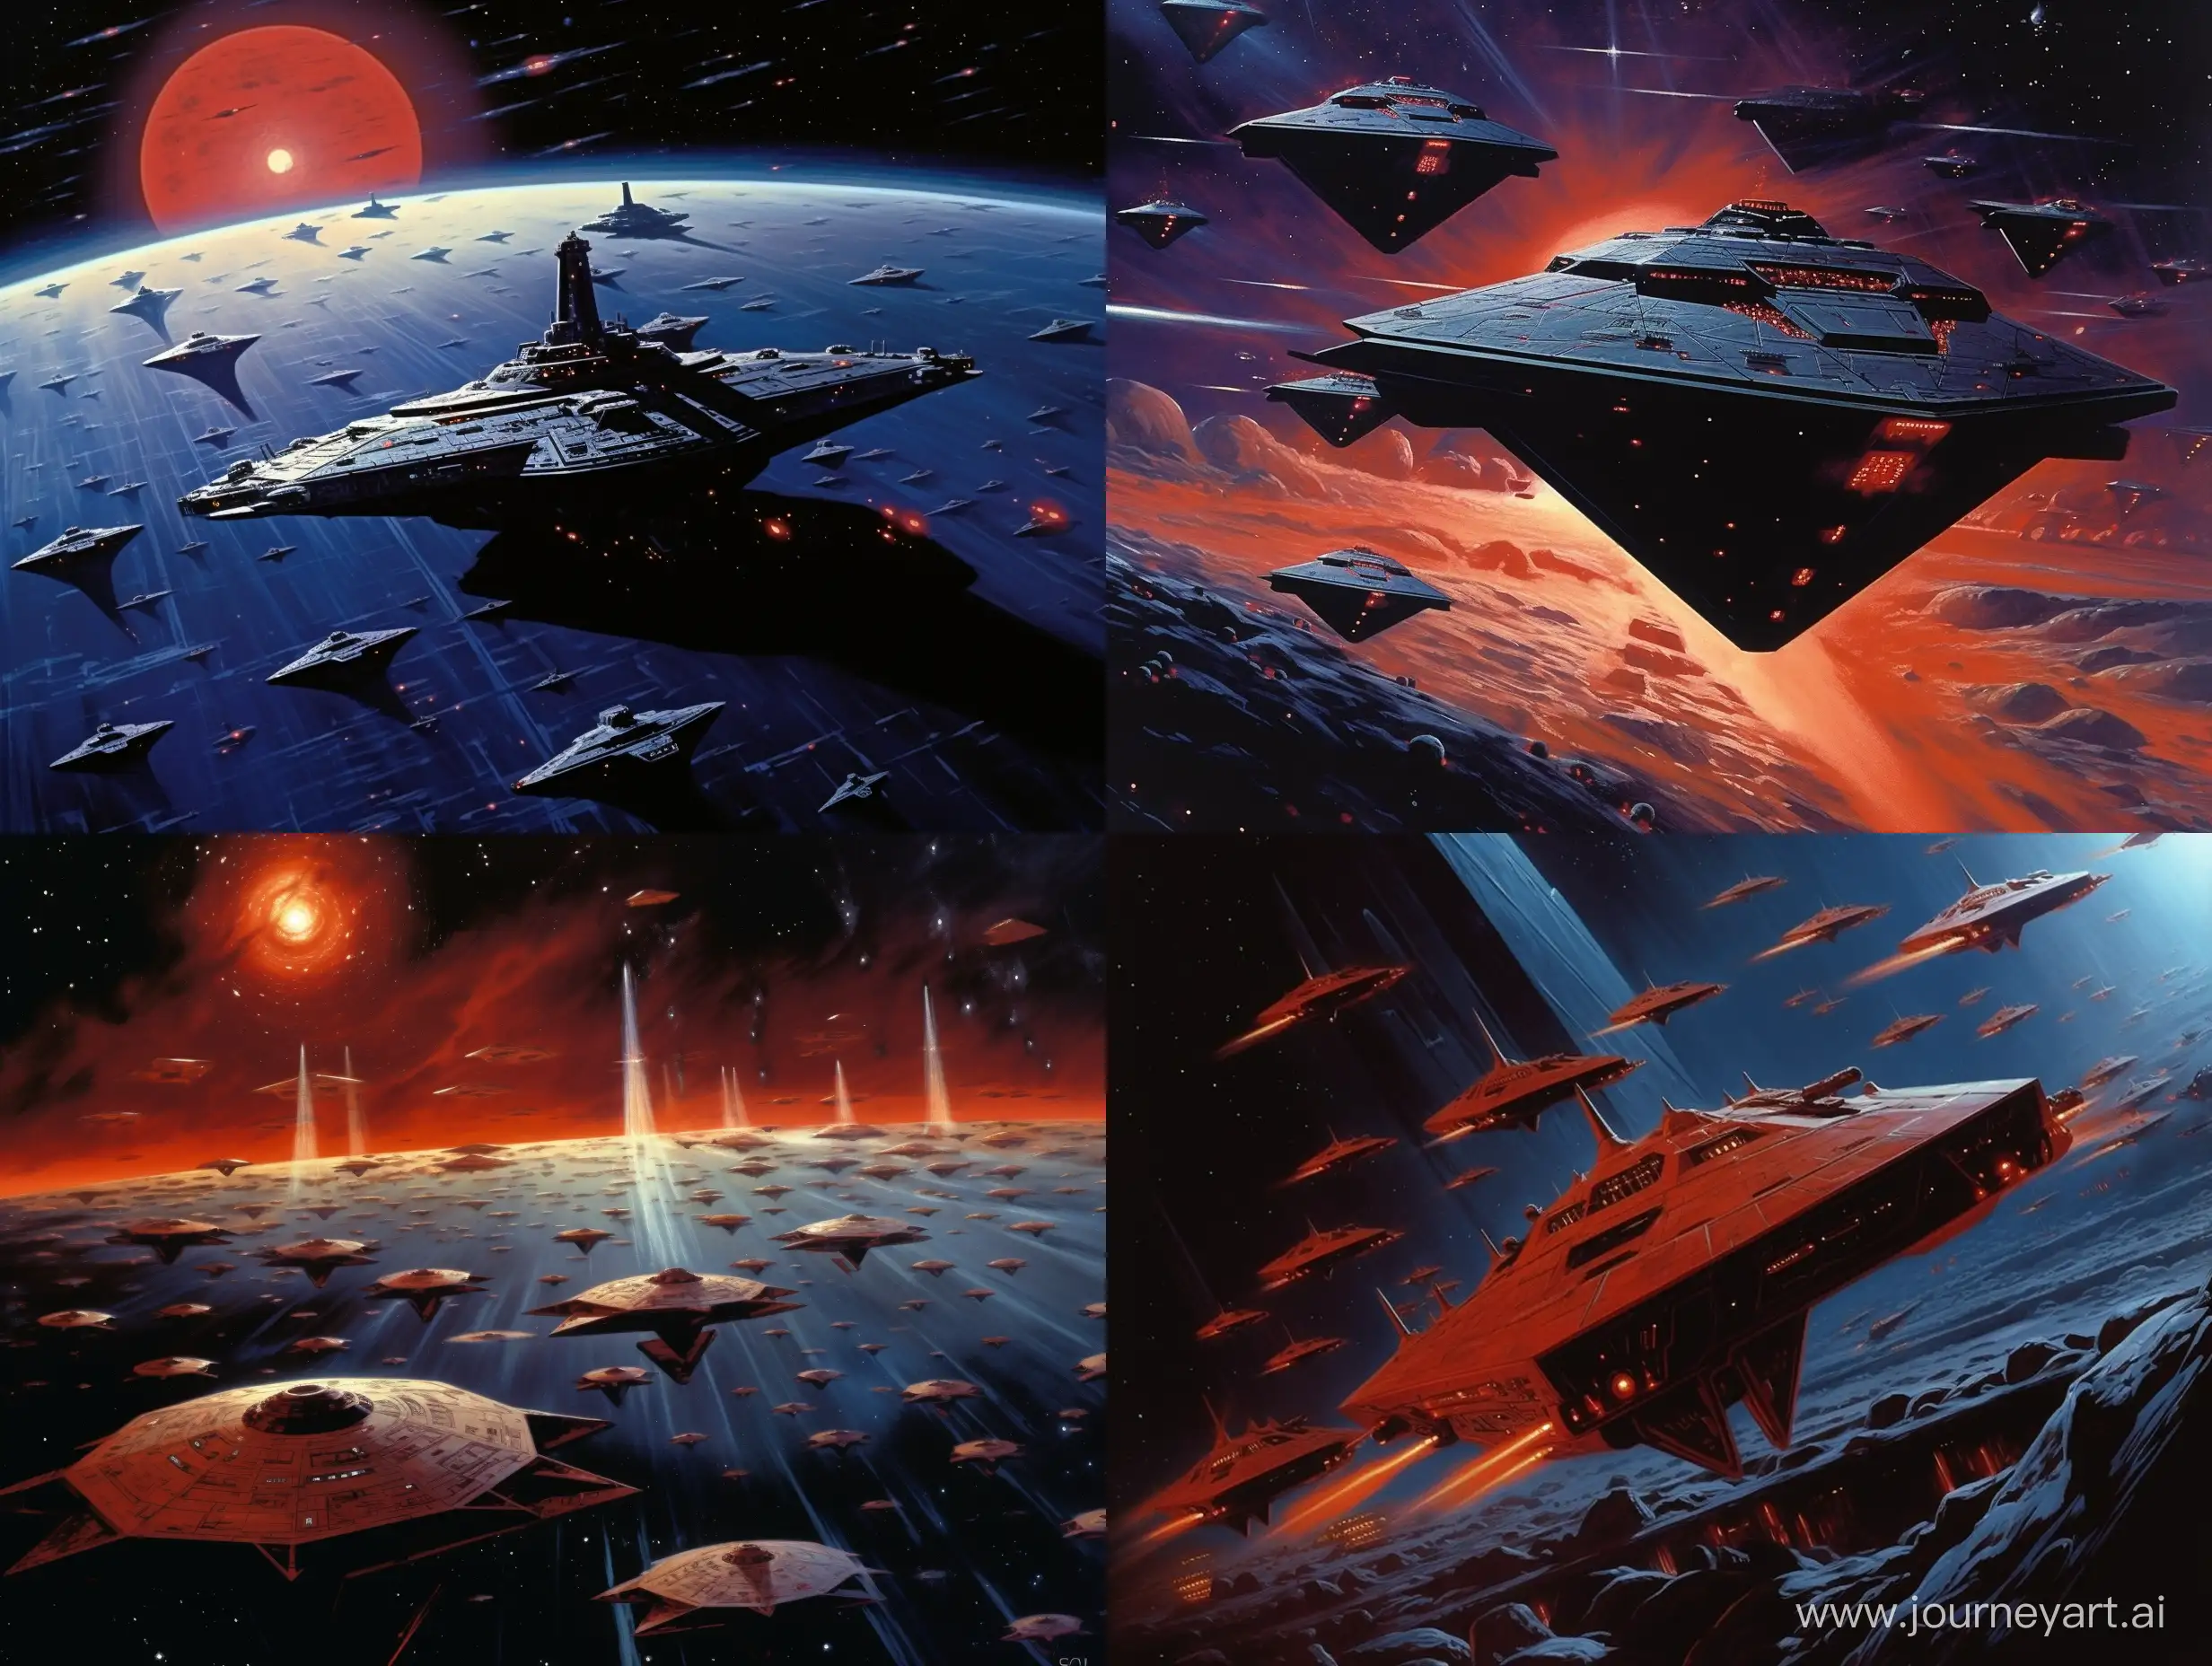 Retro-Science-Fiction-Art-Threatening-Military-Star-Destroyers-in-Outer-Space